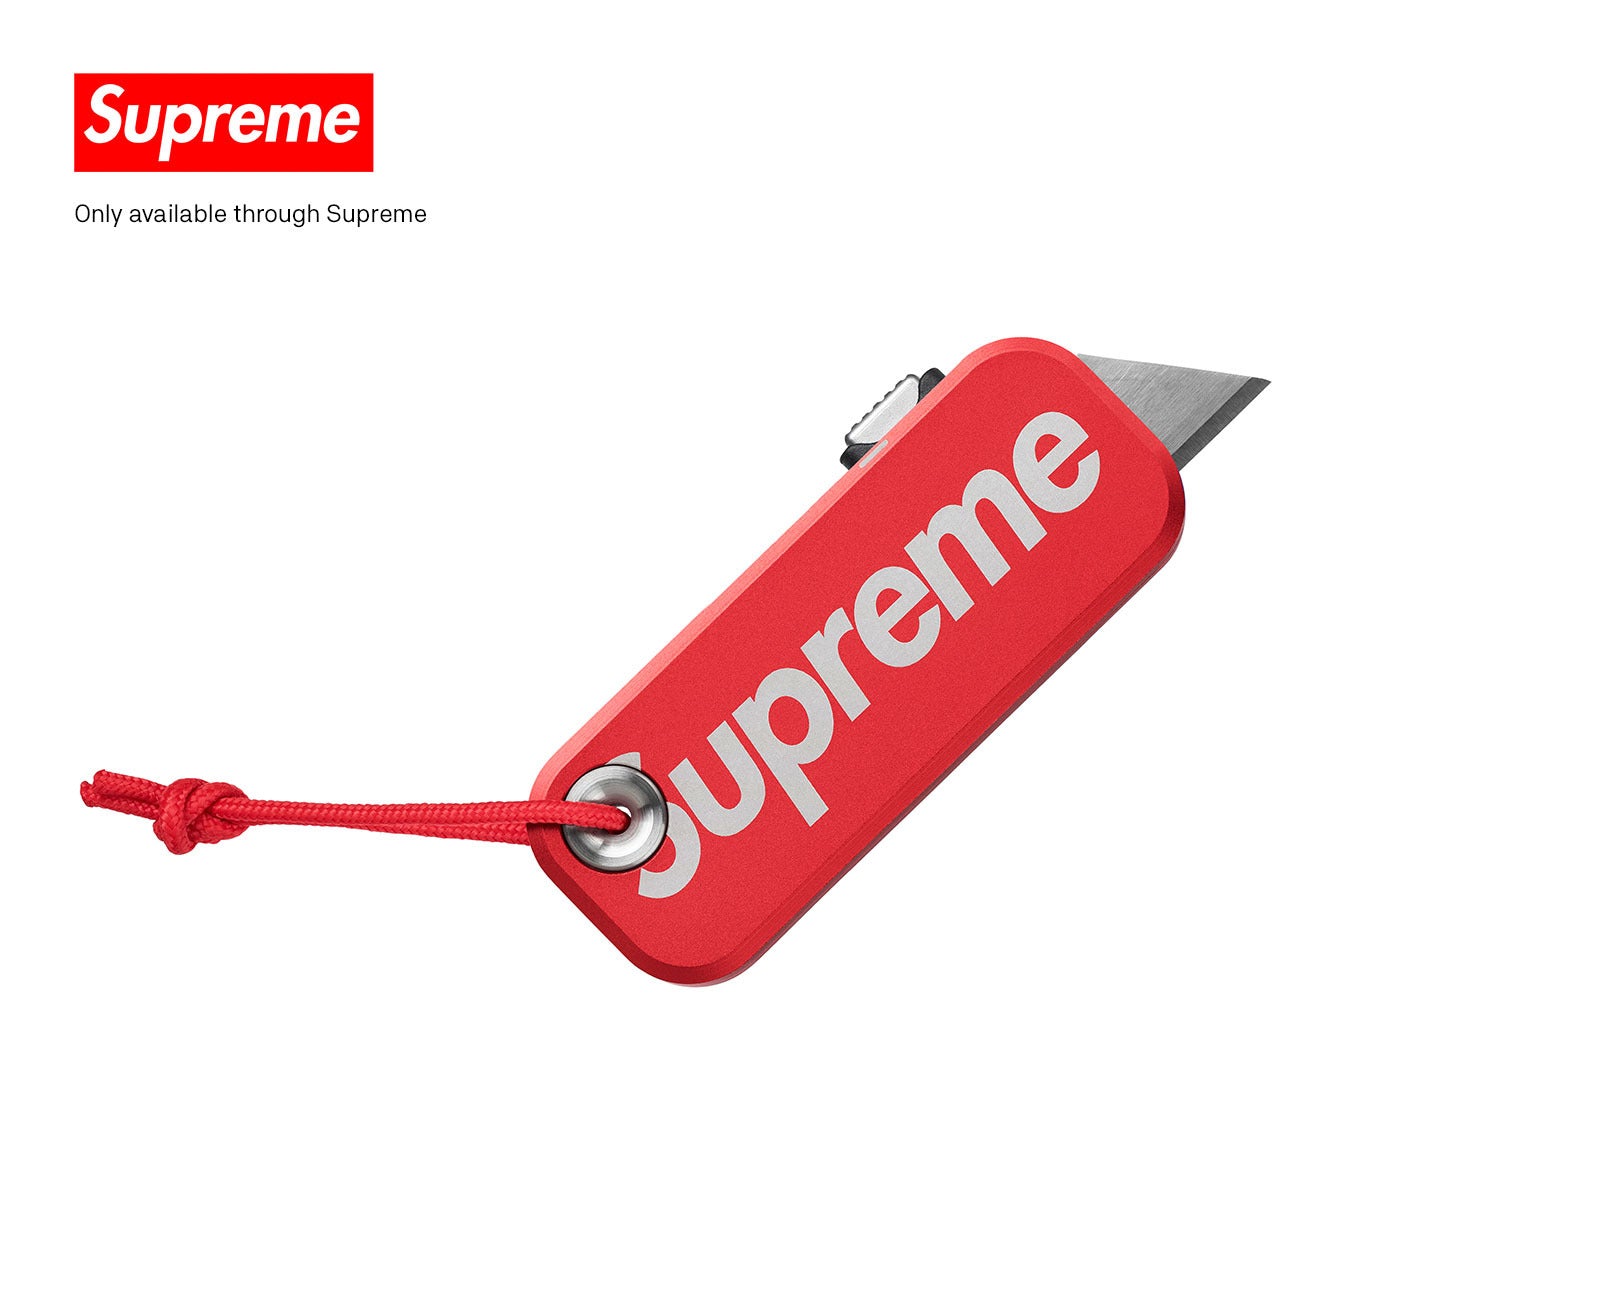 The Supreme knife with red case with Supreme logo on case.